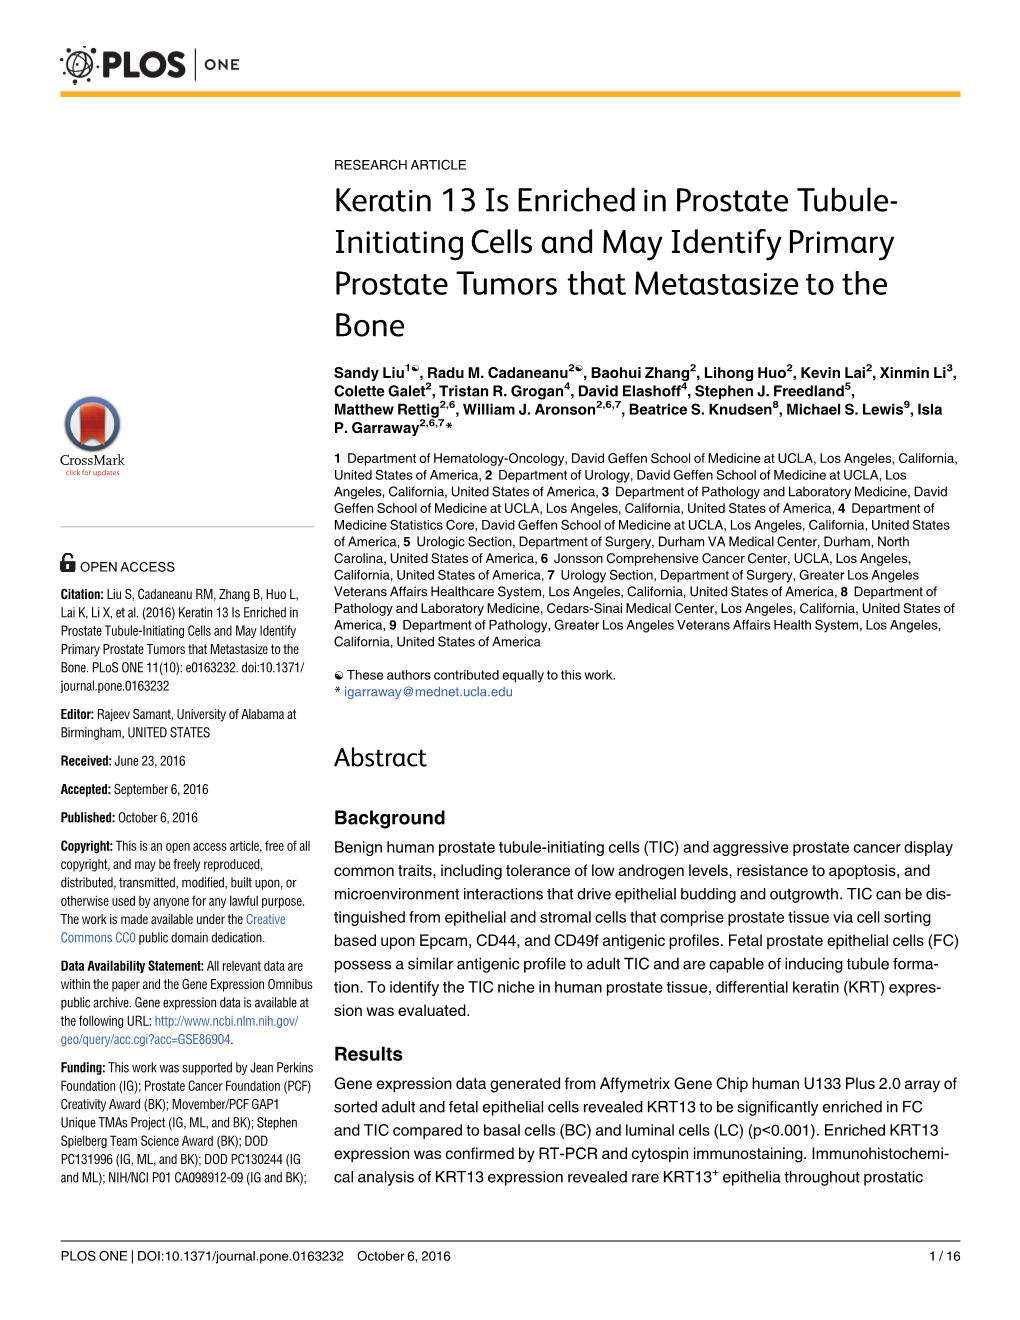 Keratin 13 Is Enriched in Prostate Tubule-Initiating Cells and May